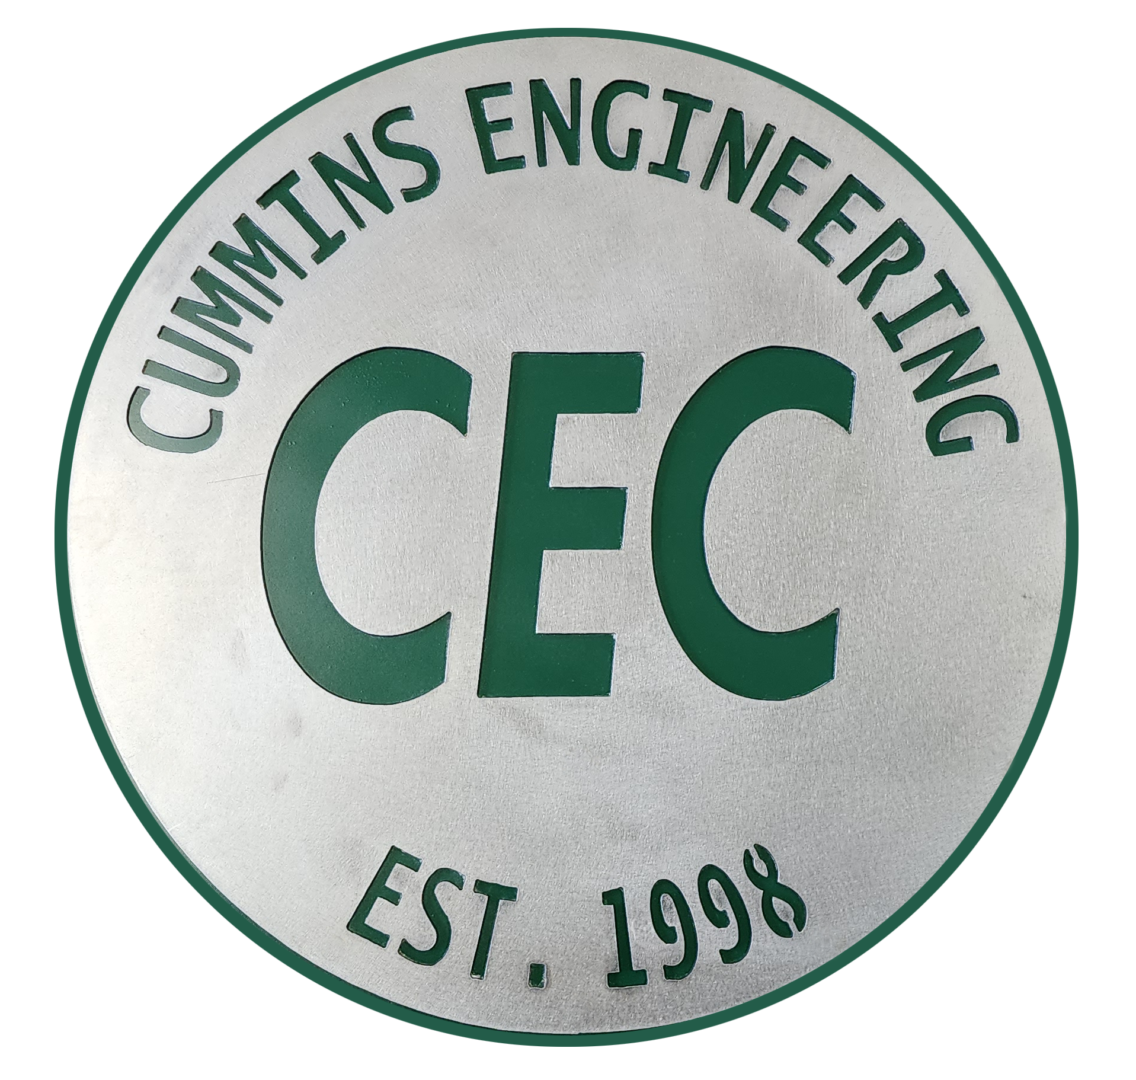 A white and green logo for cummins engineering.